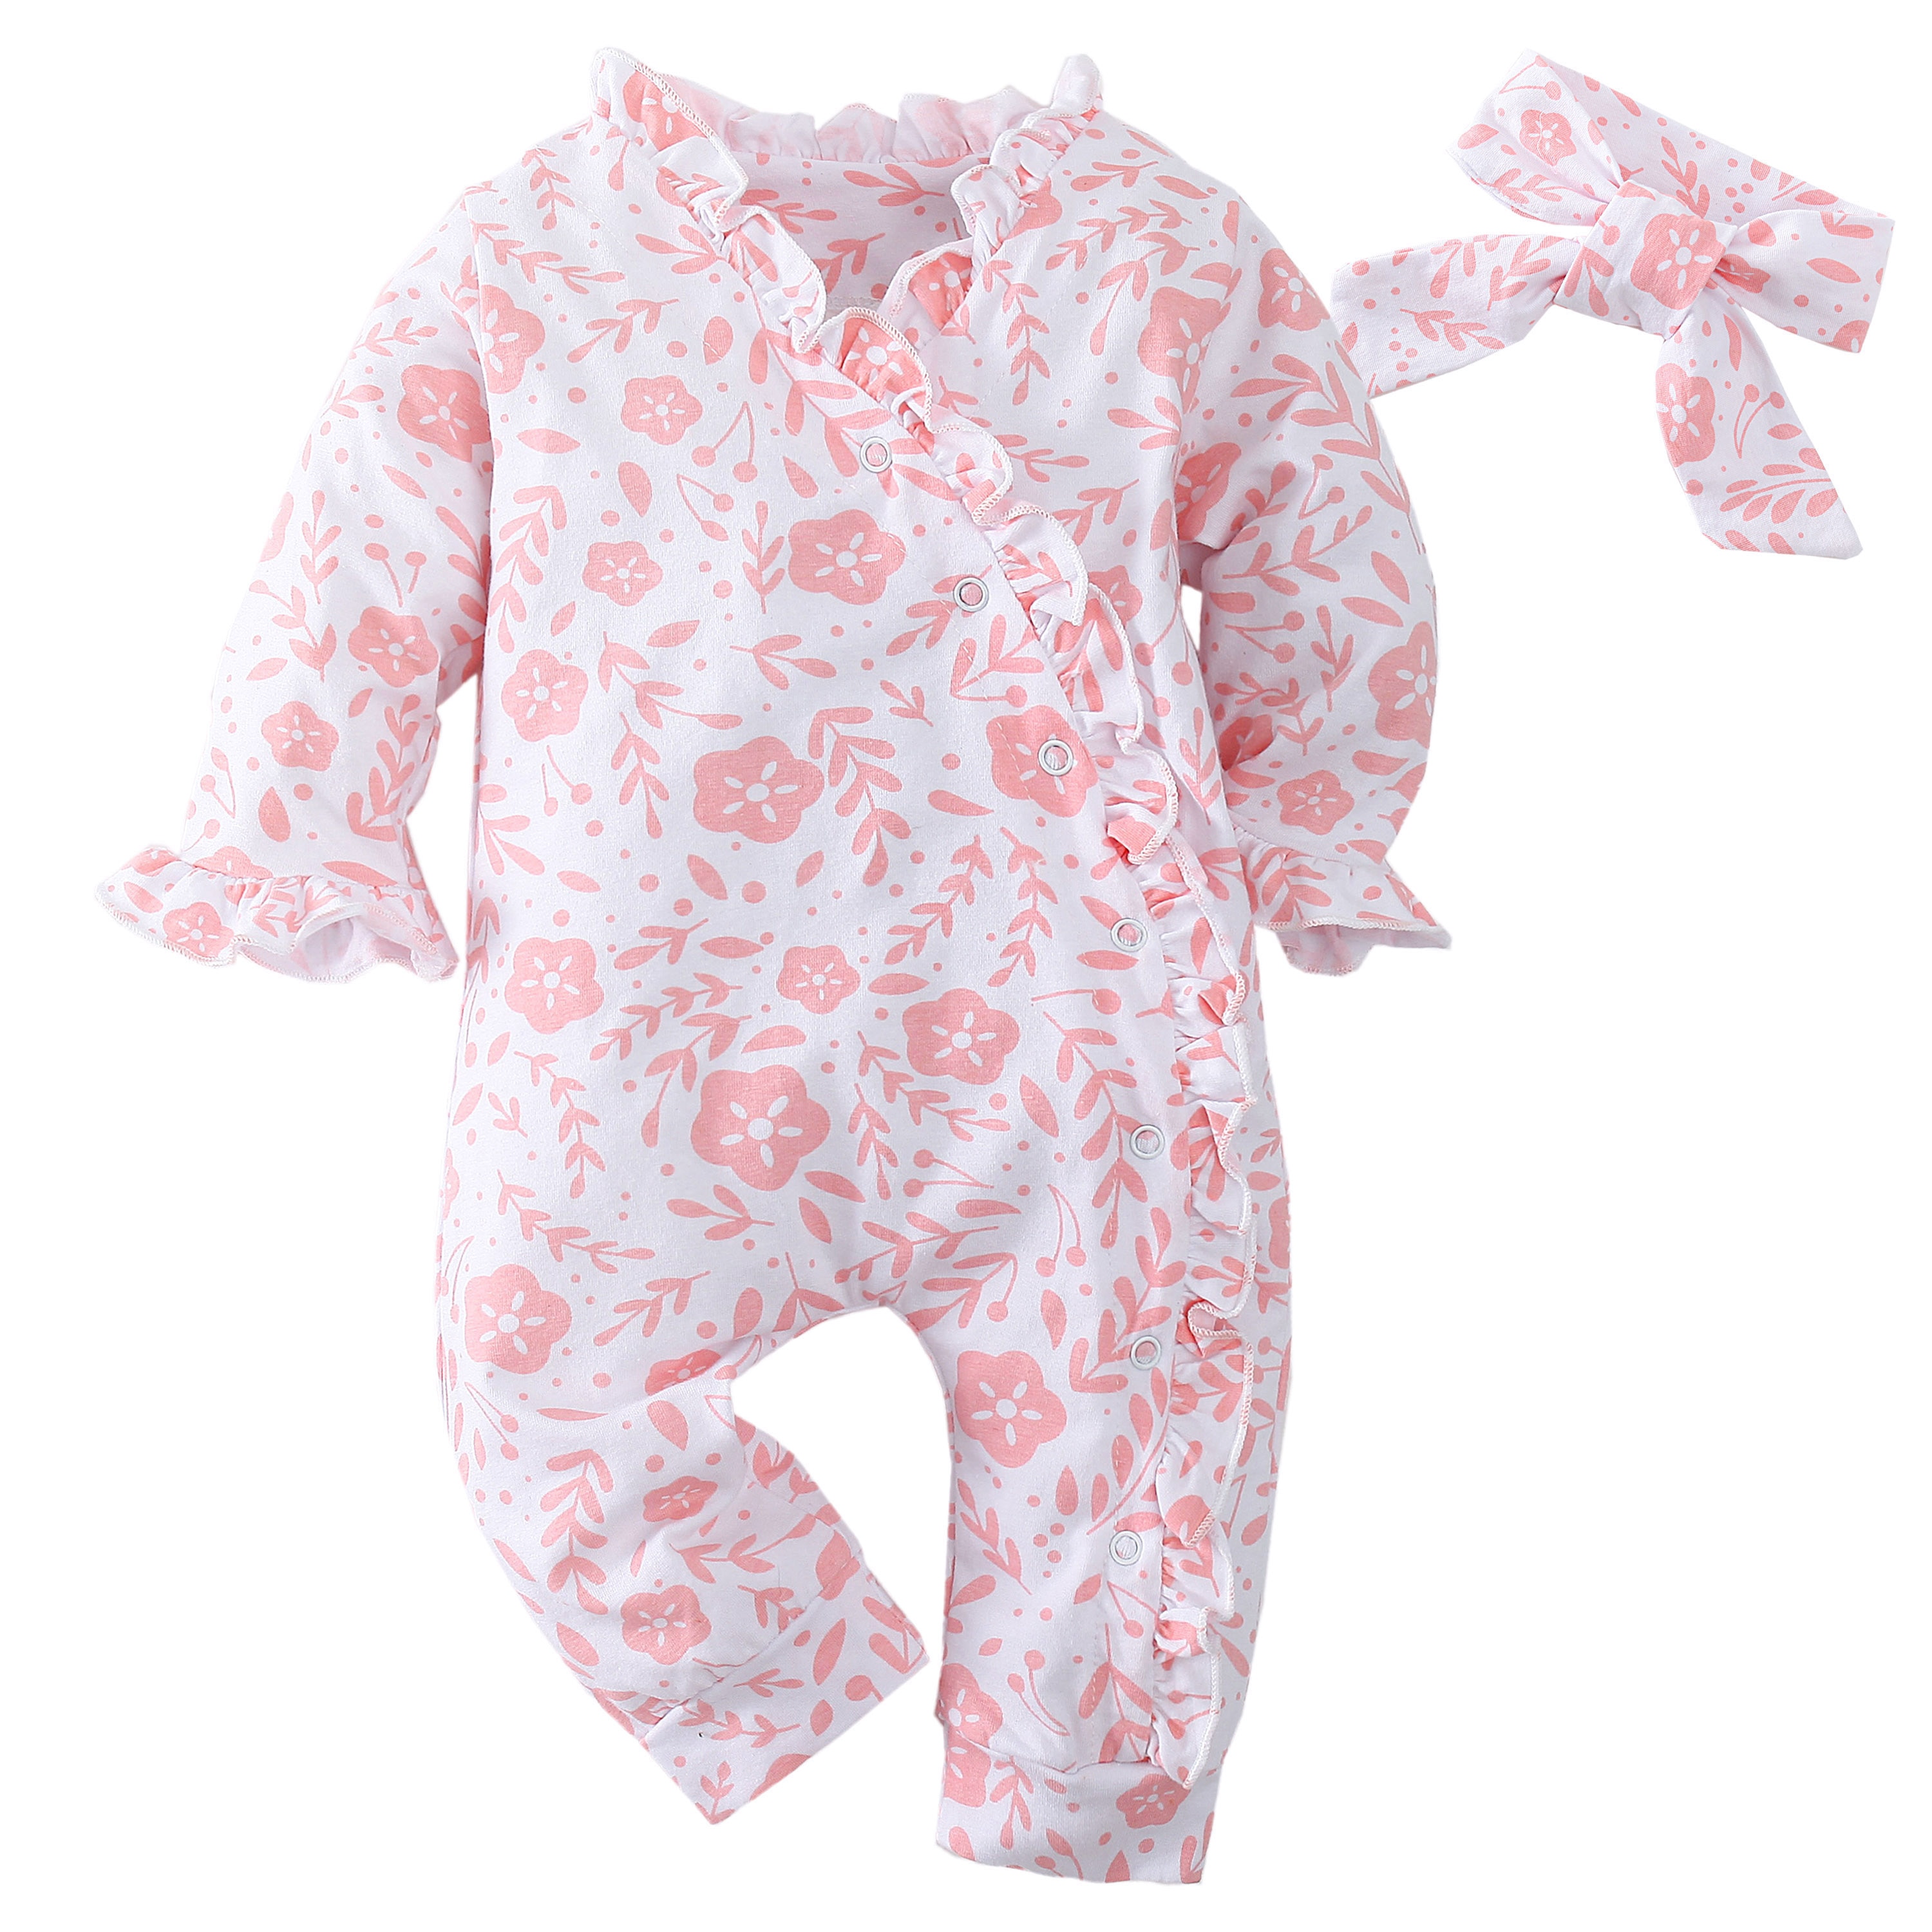 shop with crypto buy Newborn Baby Girl Rompers Long Sleeve Cotton Floral Print Jumpsuit Infant Baby Clothing Set Toddler Outfits pay with bitcoin